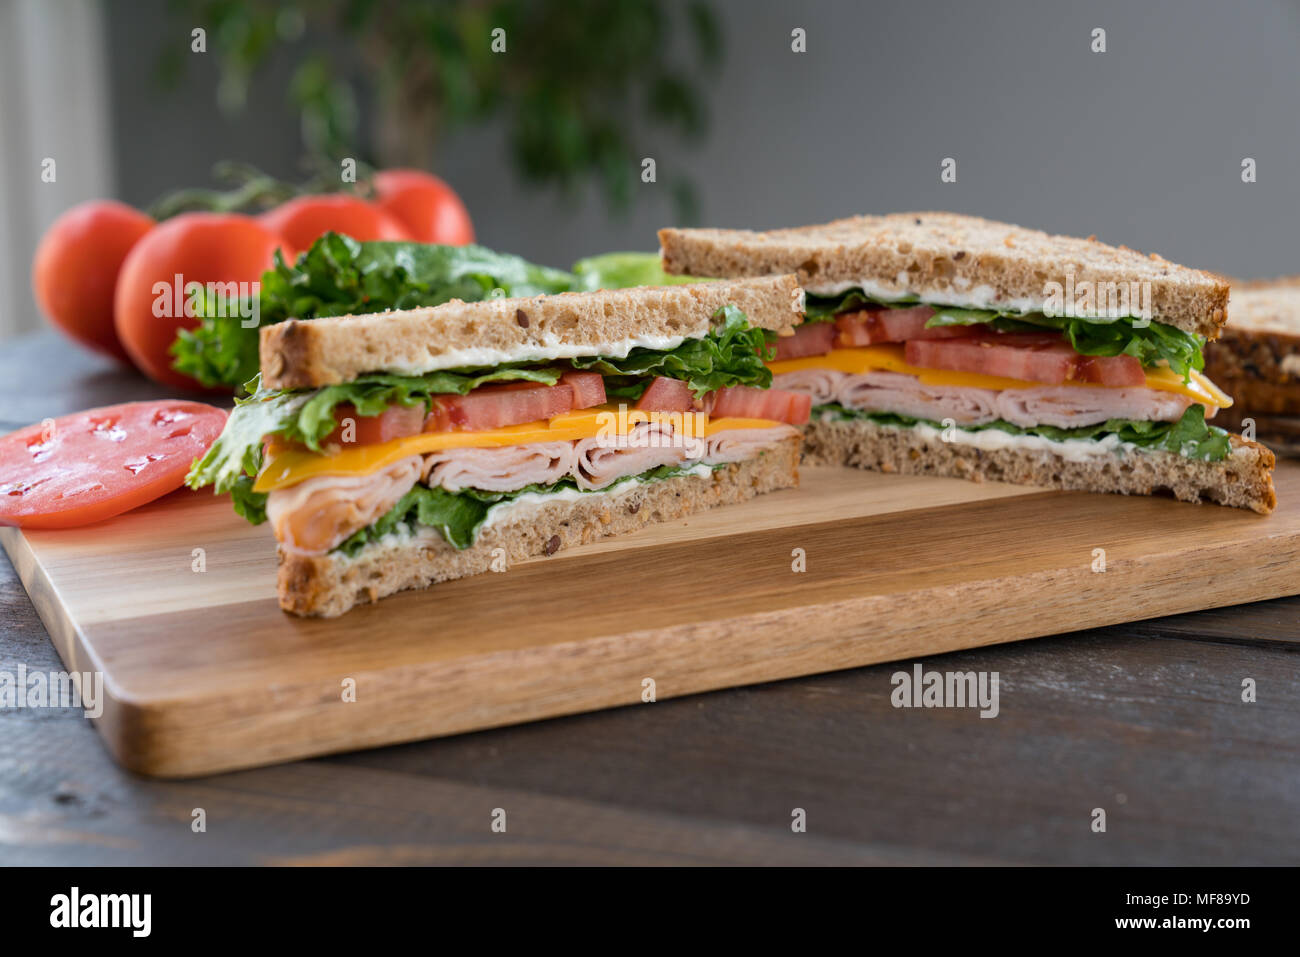 Turkey, Cheese, Tomato Sandwich with Lettuce on a Cutting Board Stock Photo